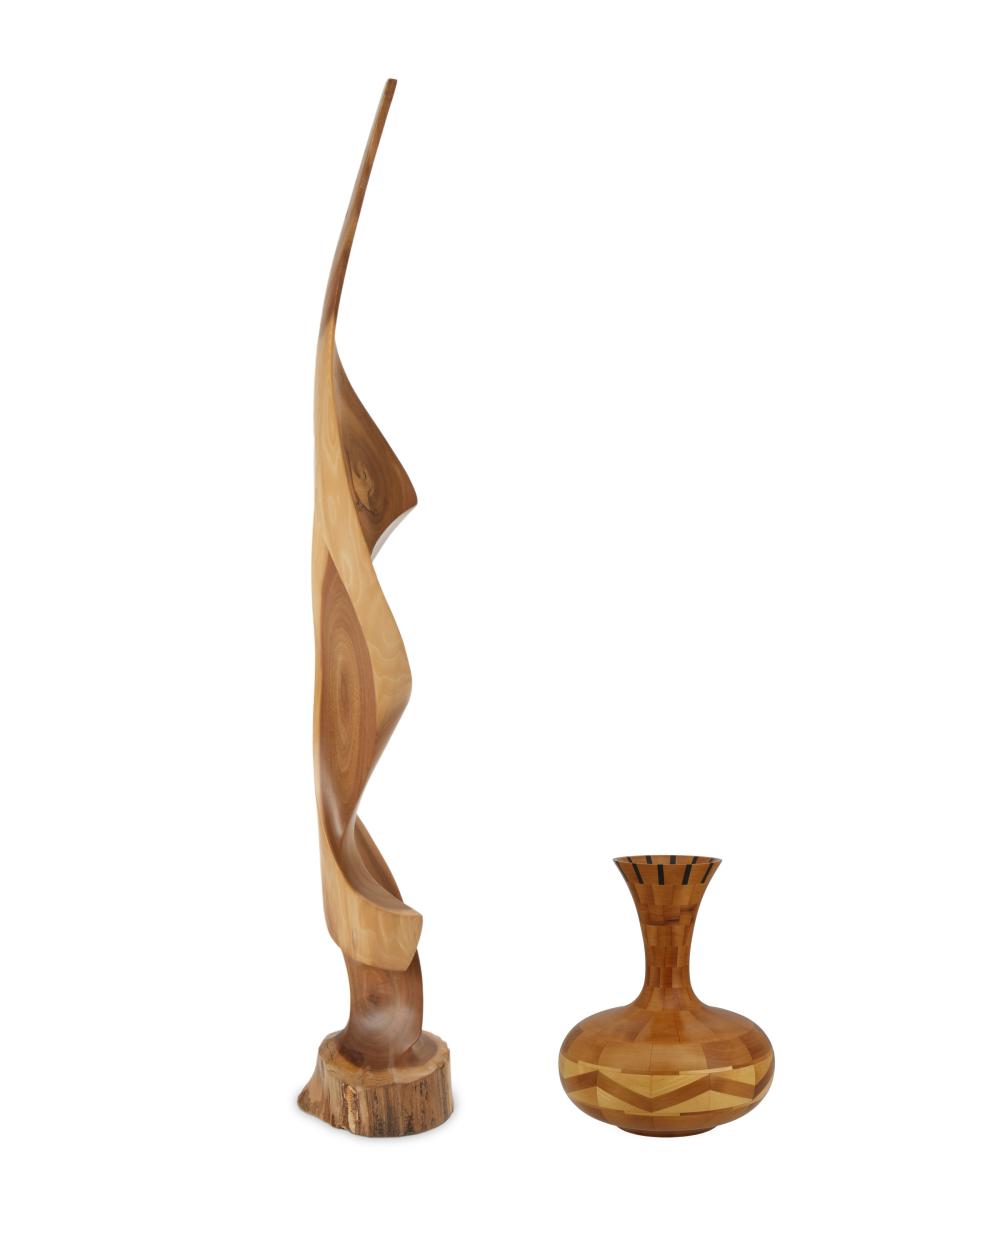 TWO CONTEMPORARY WOOD SCULPTURAL